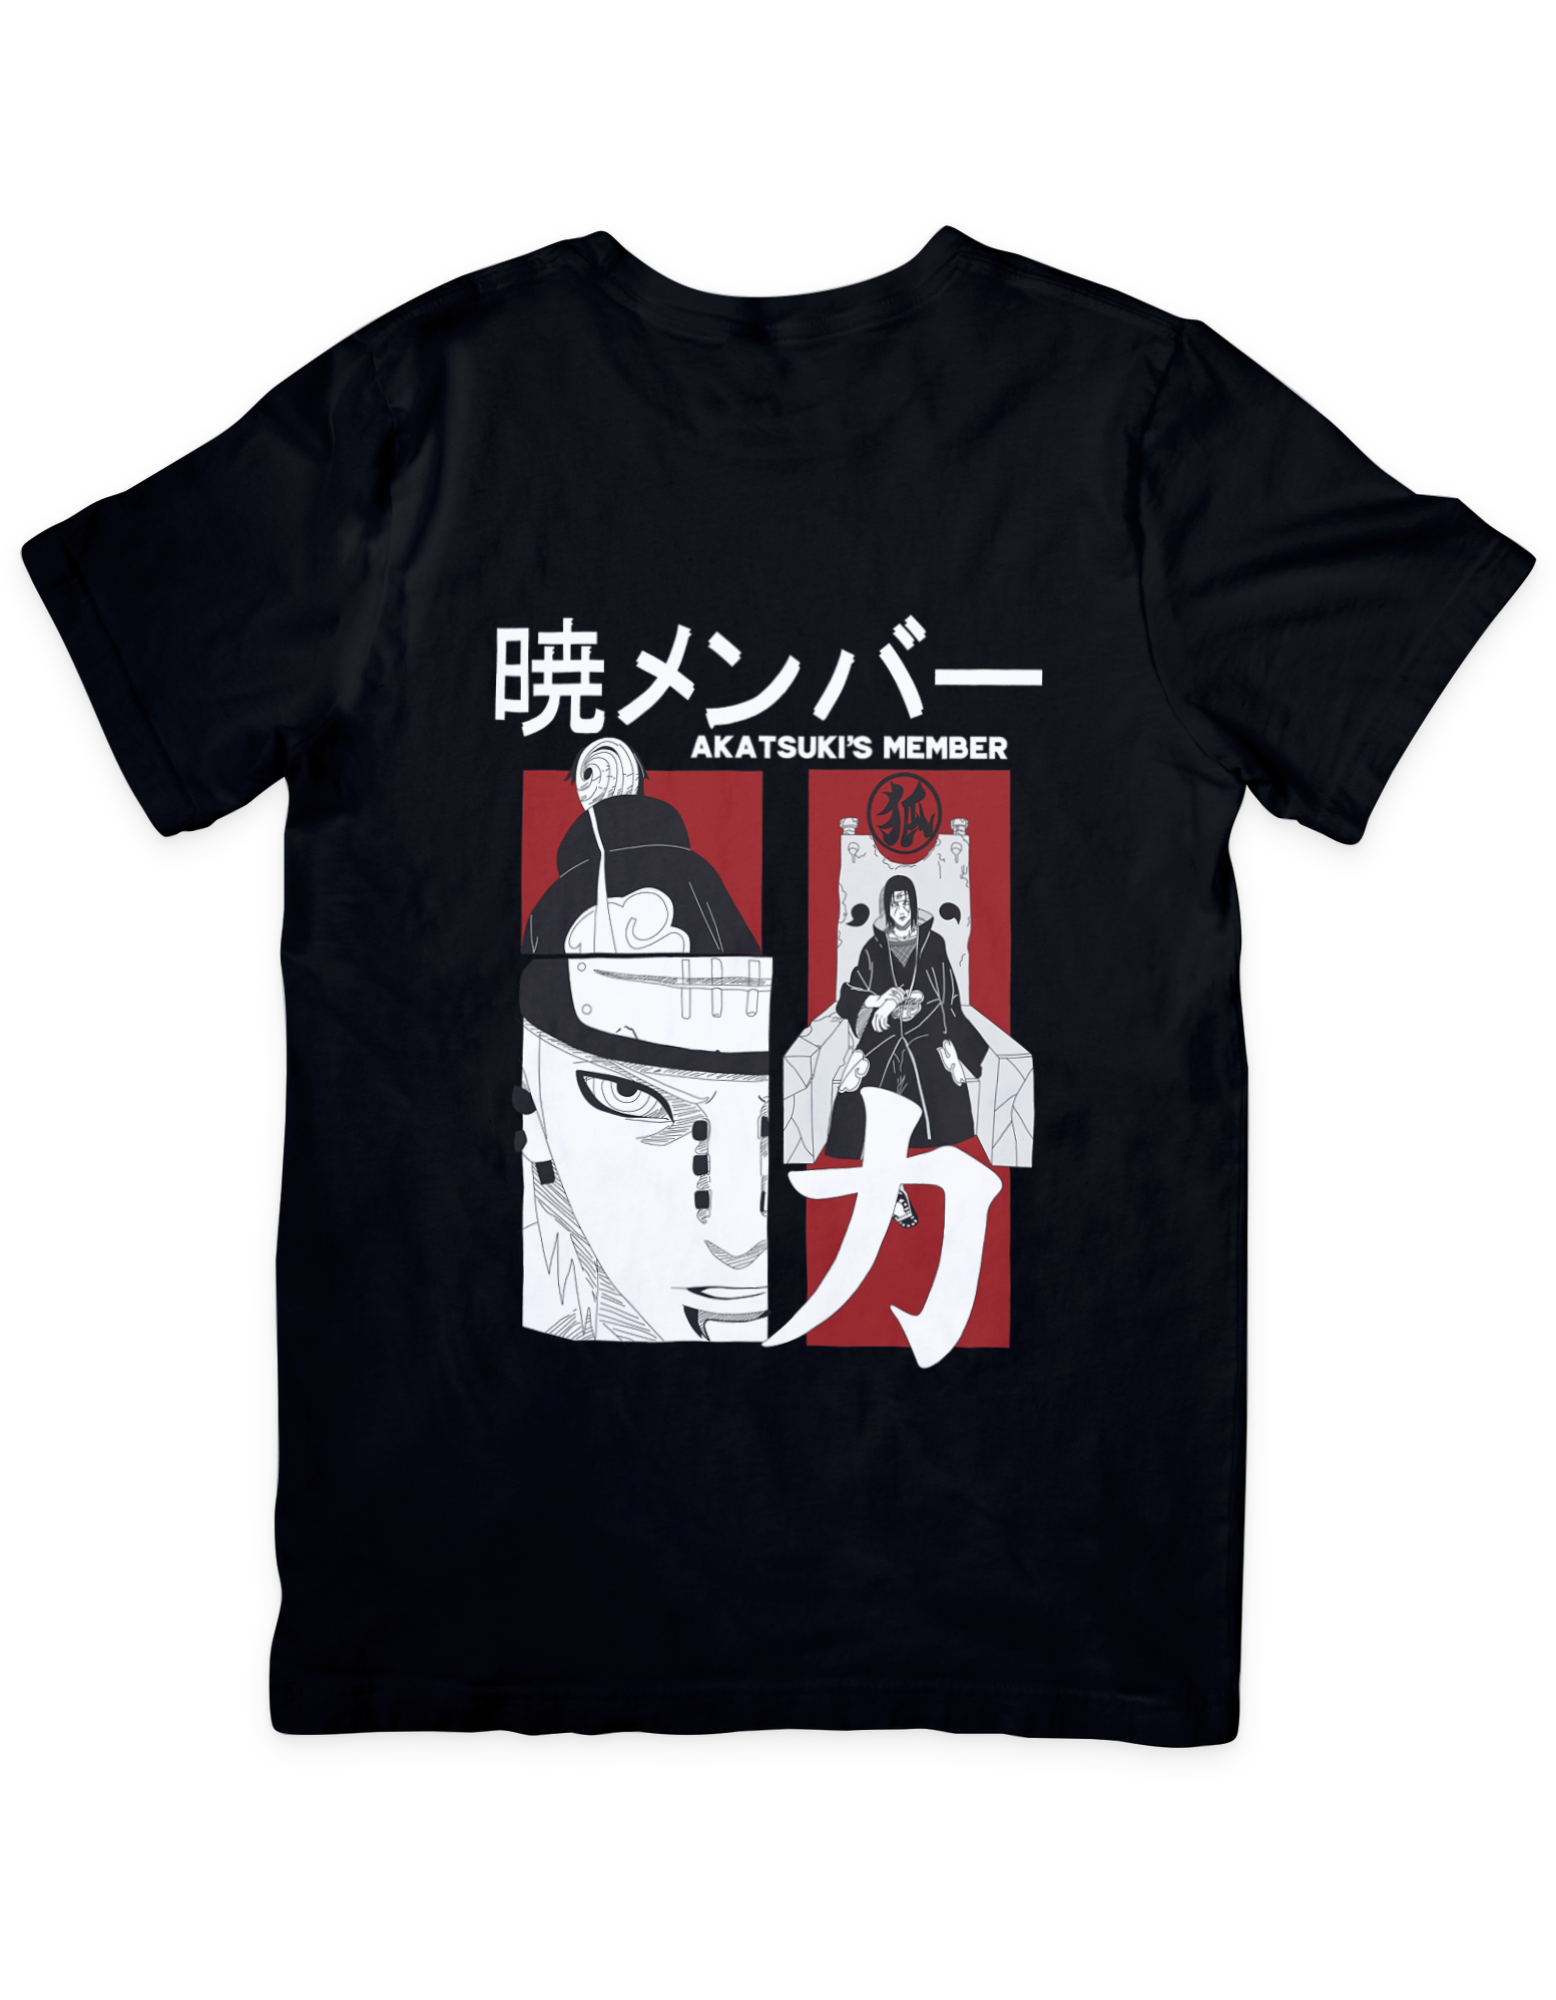 Akatsuki member anime t-shirt - featuring the iconic red cloud symbol and silhouettes of the enigmatic Akatsuki members from the Naruto series